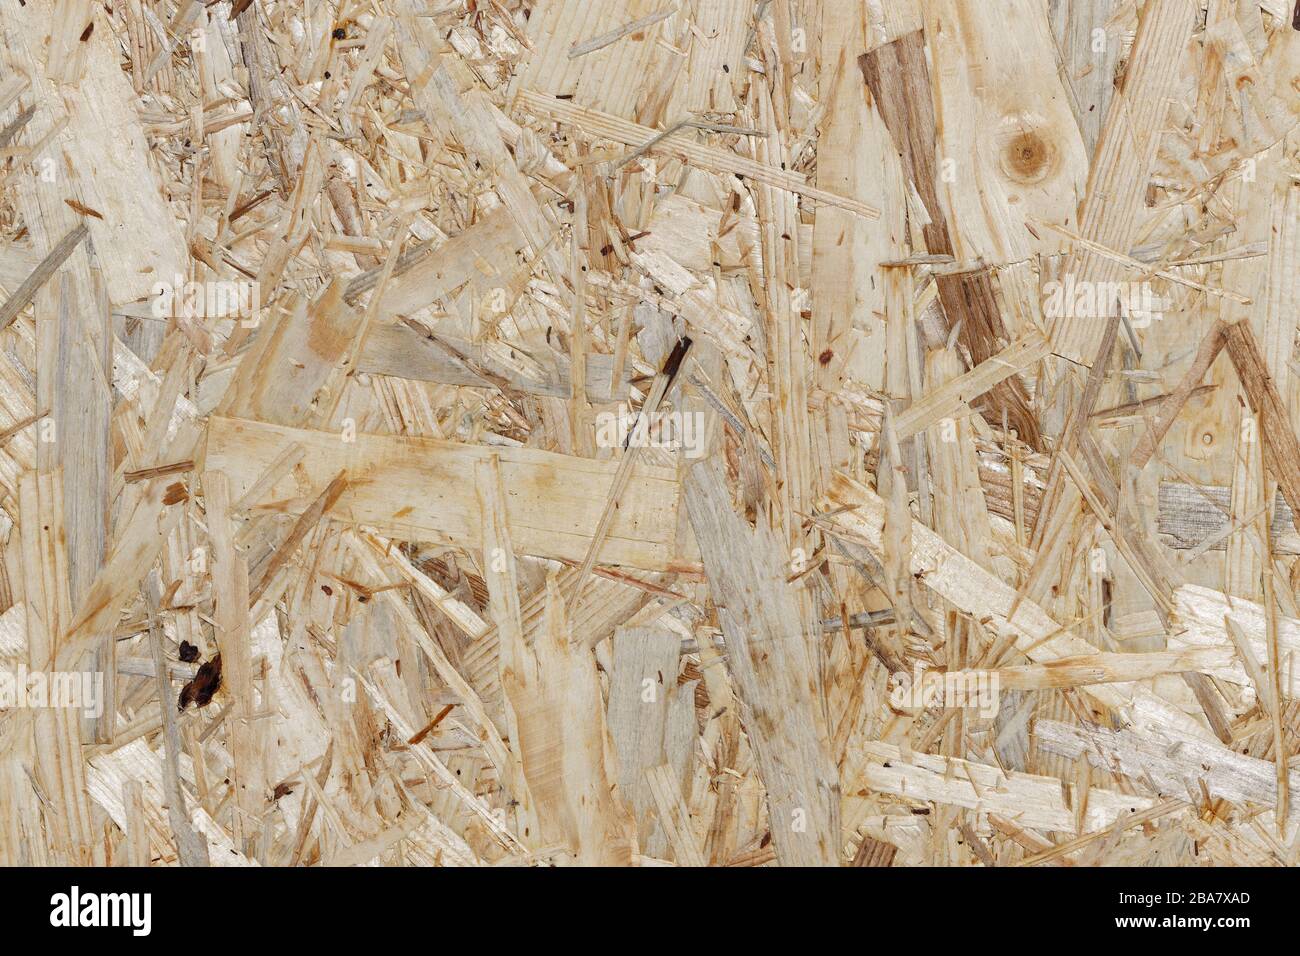 Waste Wood Recycling: Section of an Oriented Strand Board: closeup section of an oriented strand board, made of different kinds of softwood strands Stock Photo